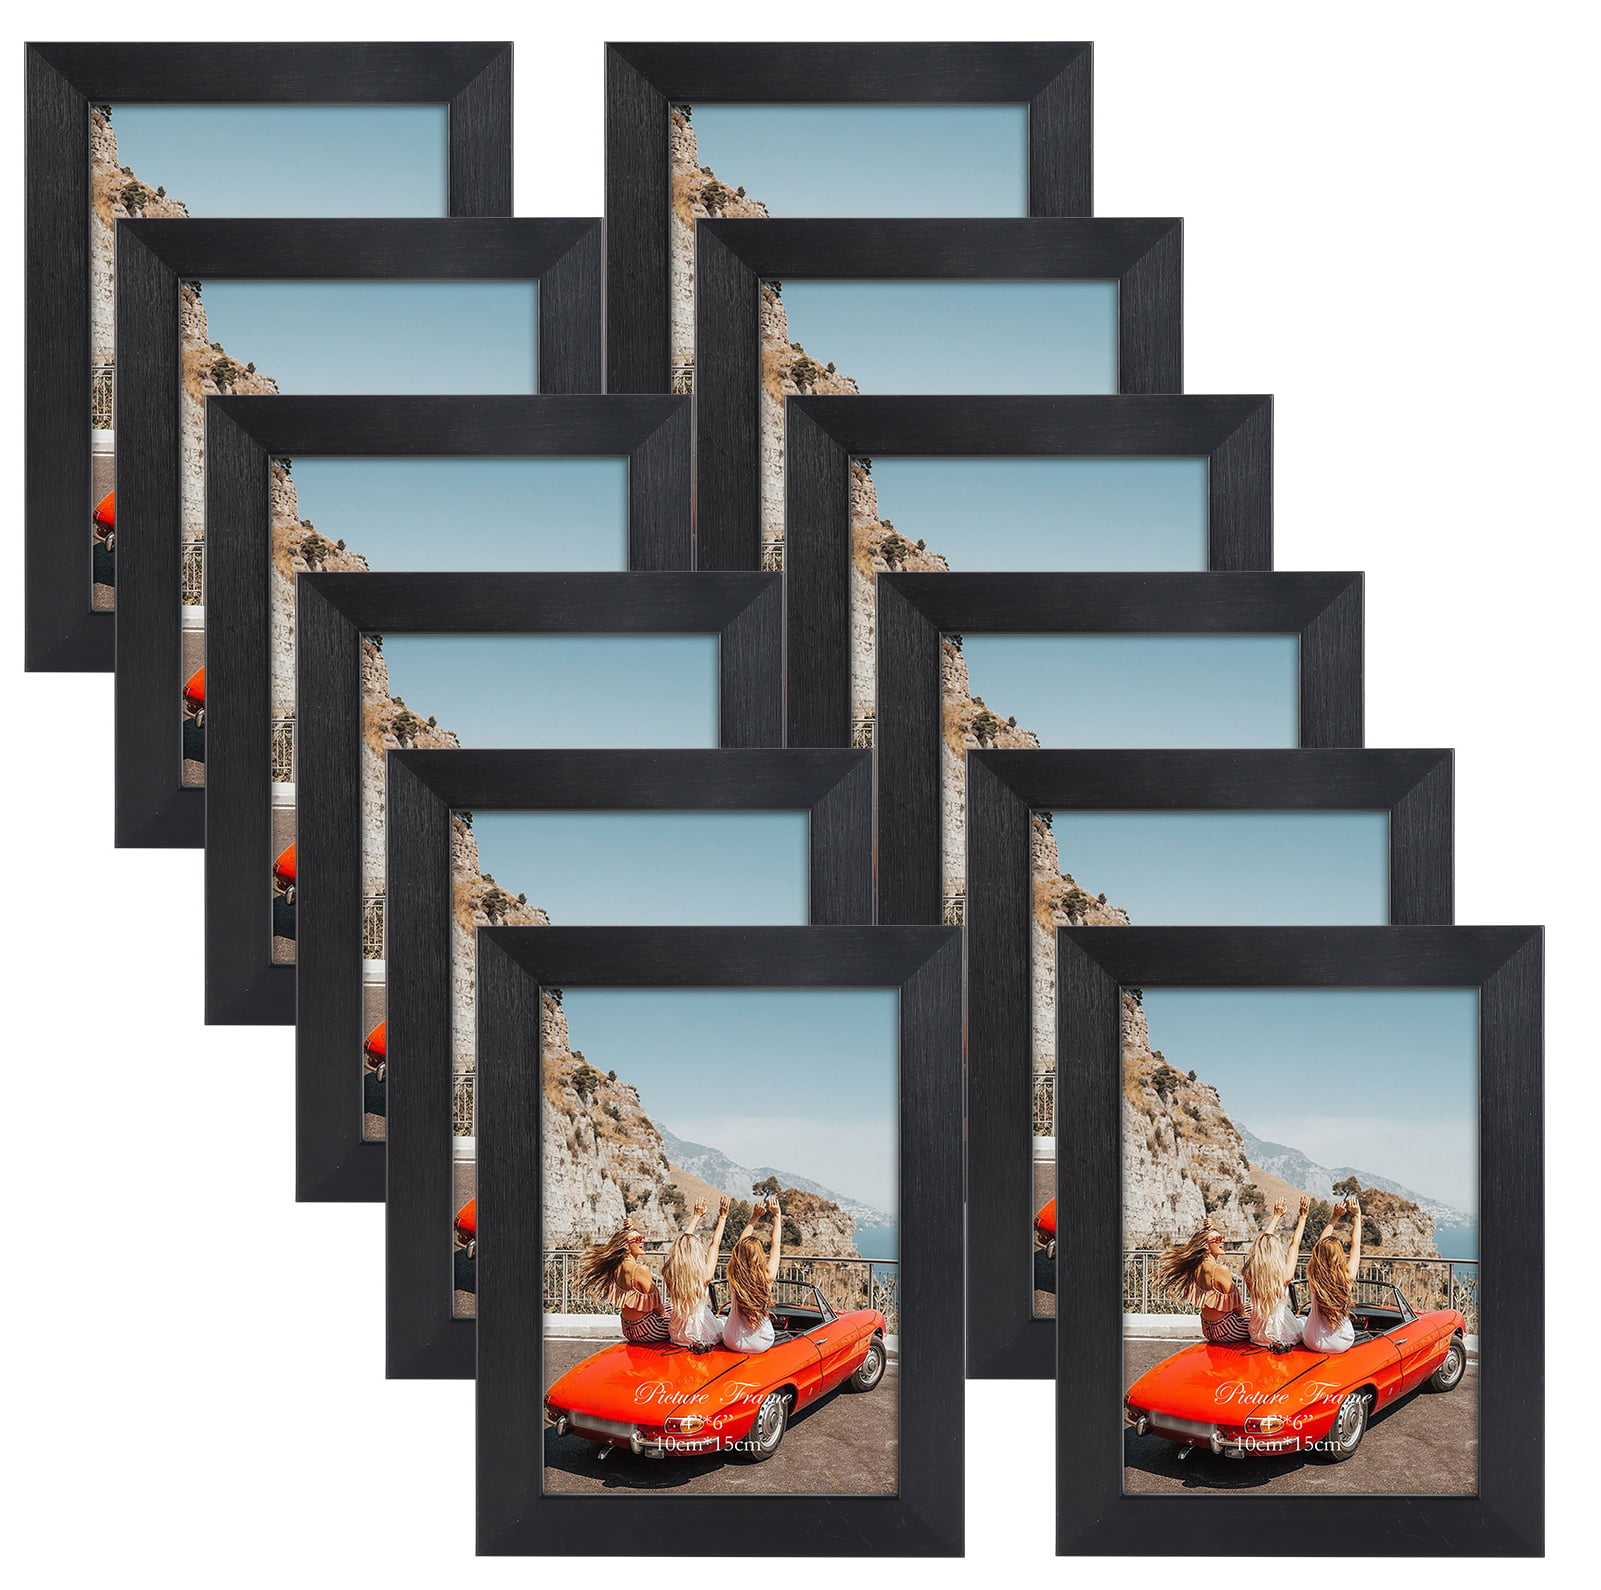 DDaoty Black 4x6 Picture Frame Rustic Solid Wood 2 Pcs High Definition Real  Glass, 4x6 Frames Tabletop or Wall Display